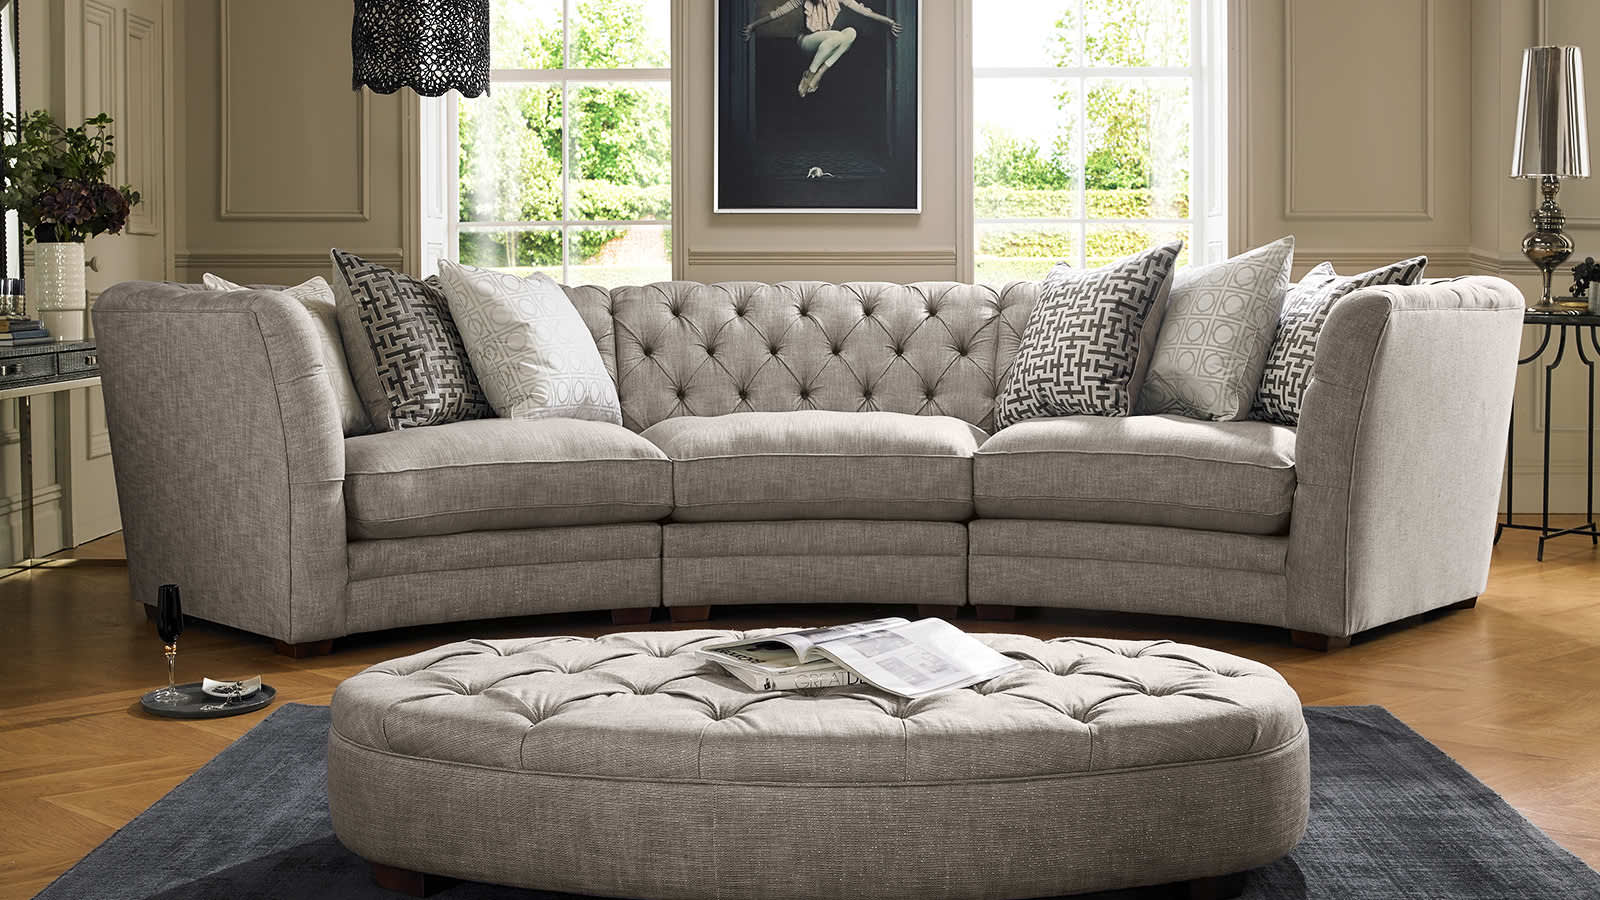 Image of: rounded loveseat